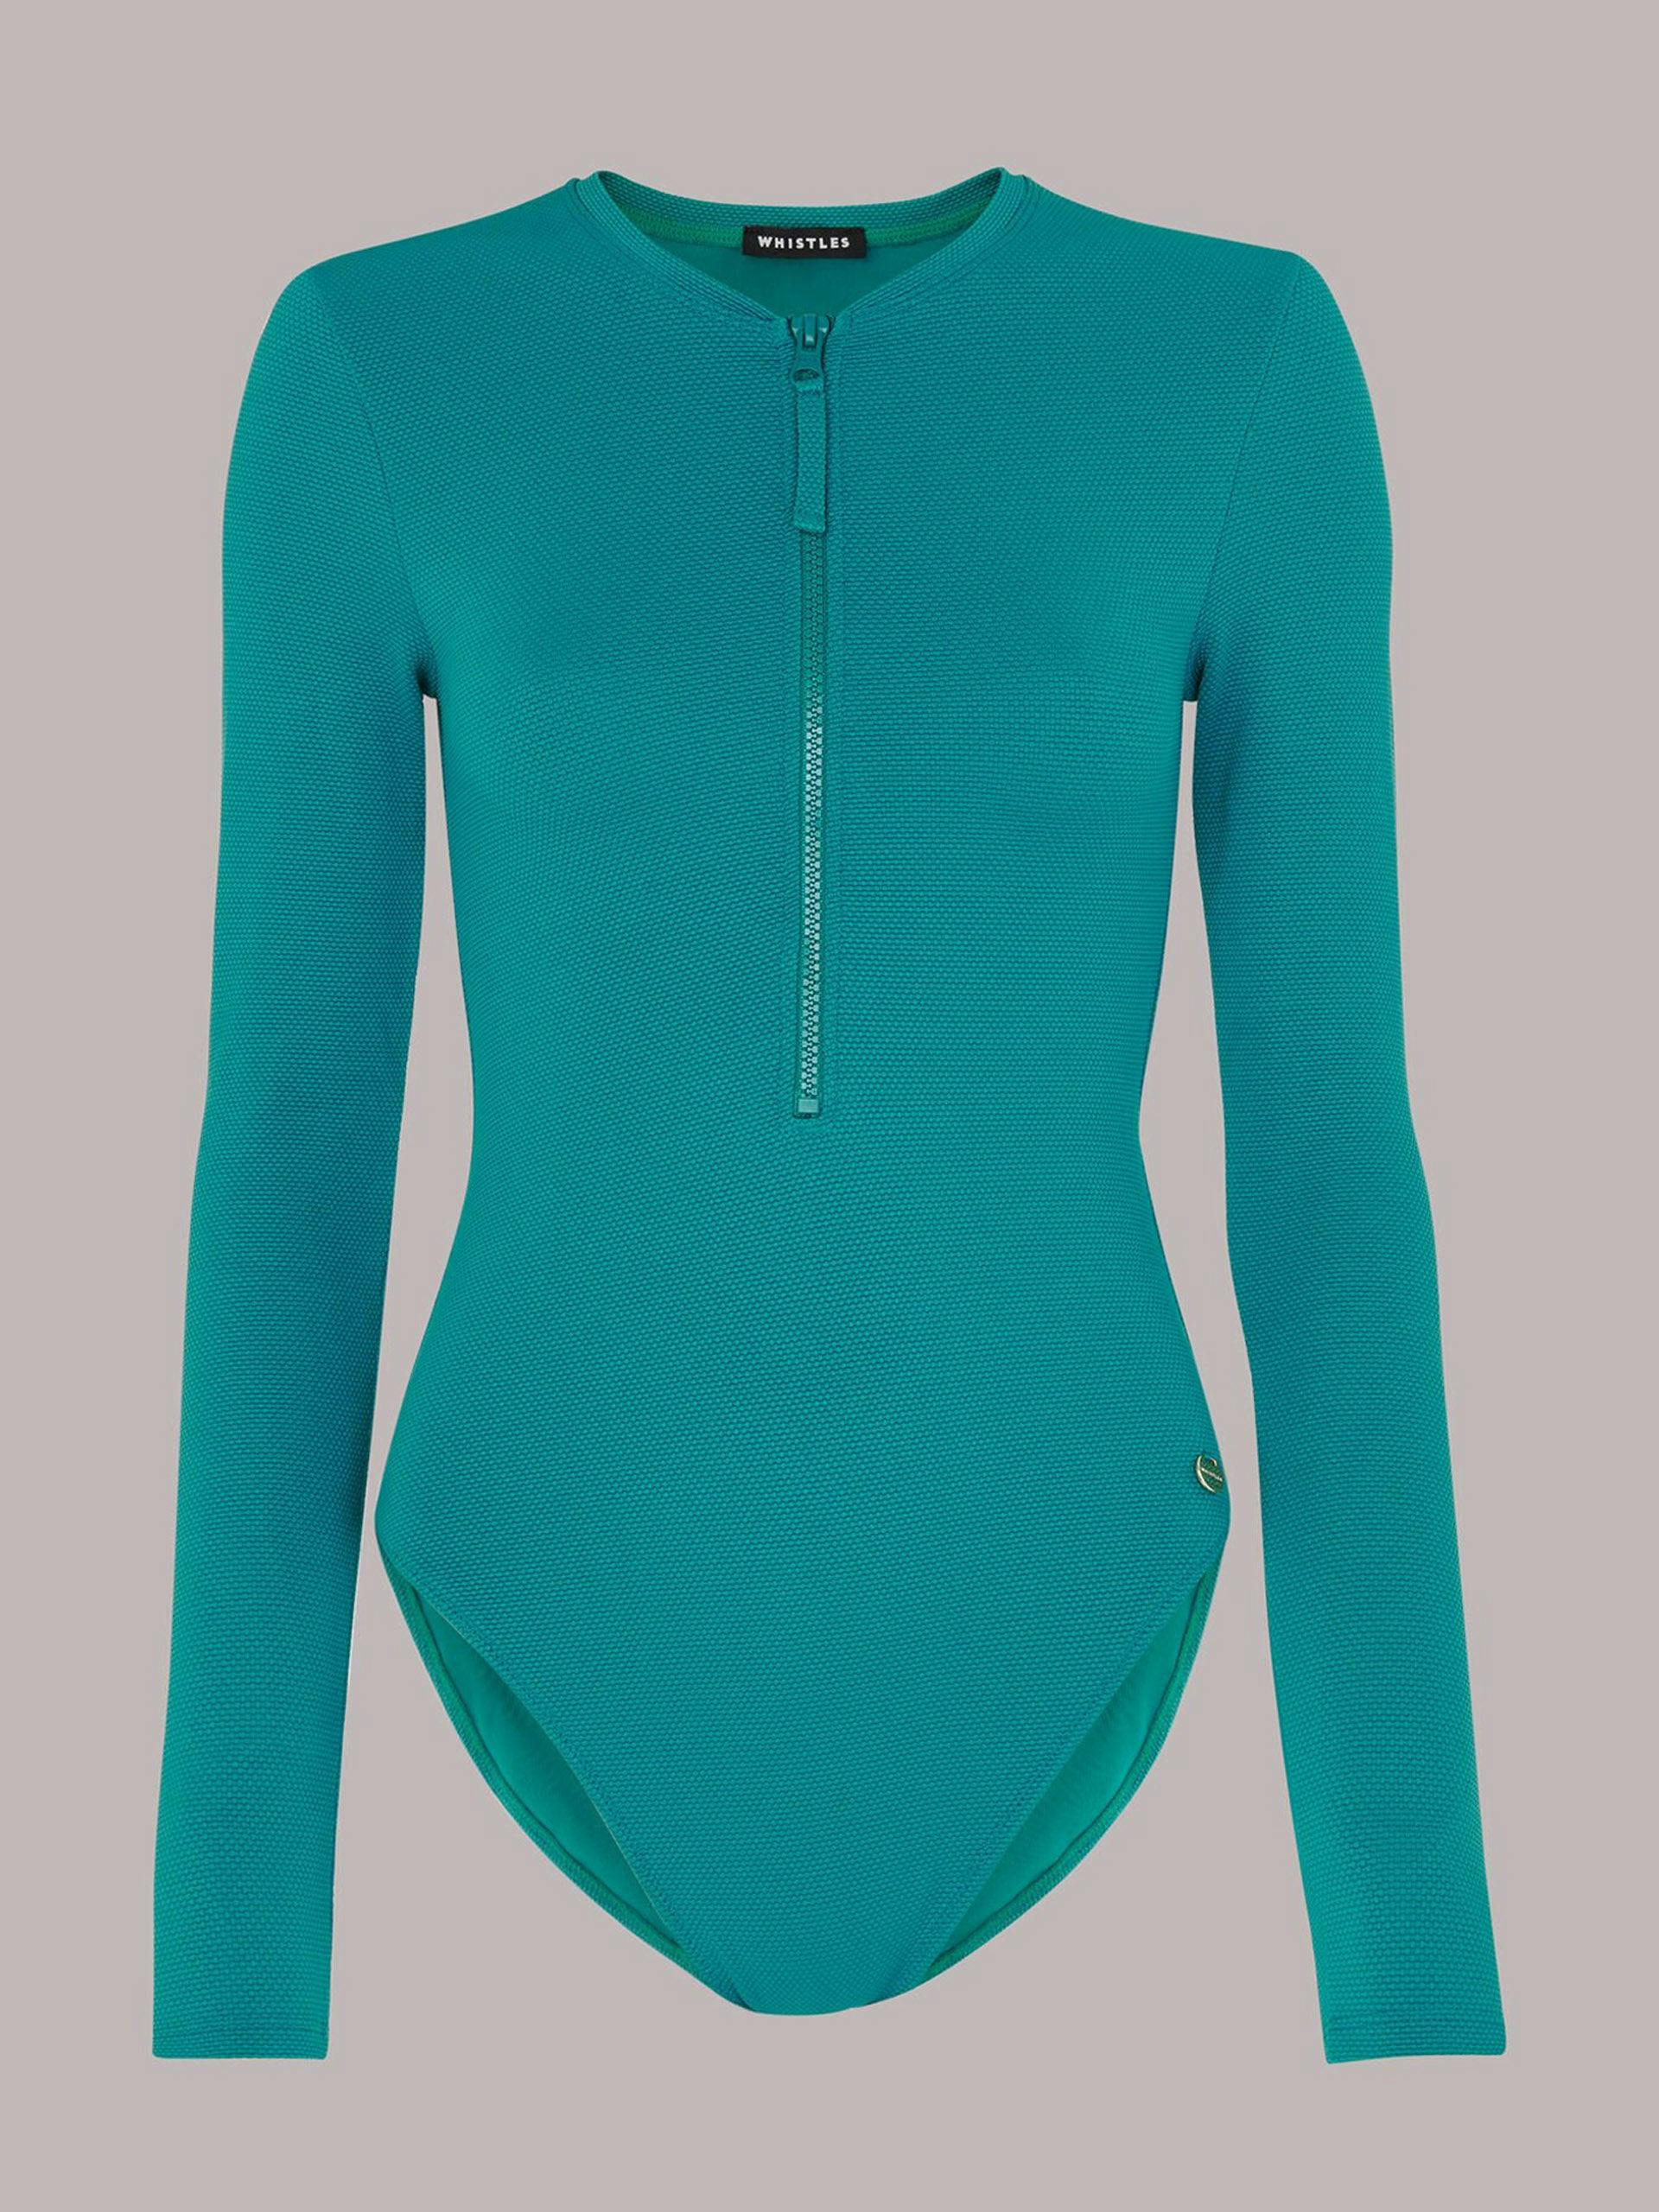 Teal textured swimsuit